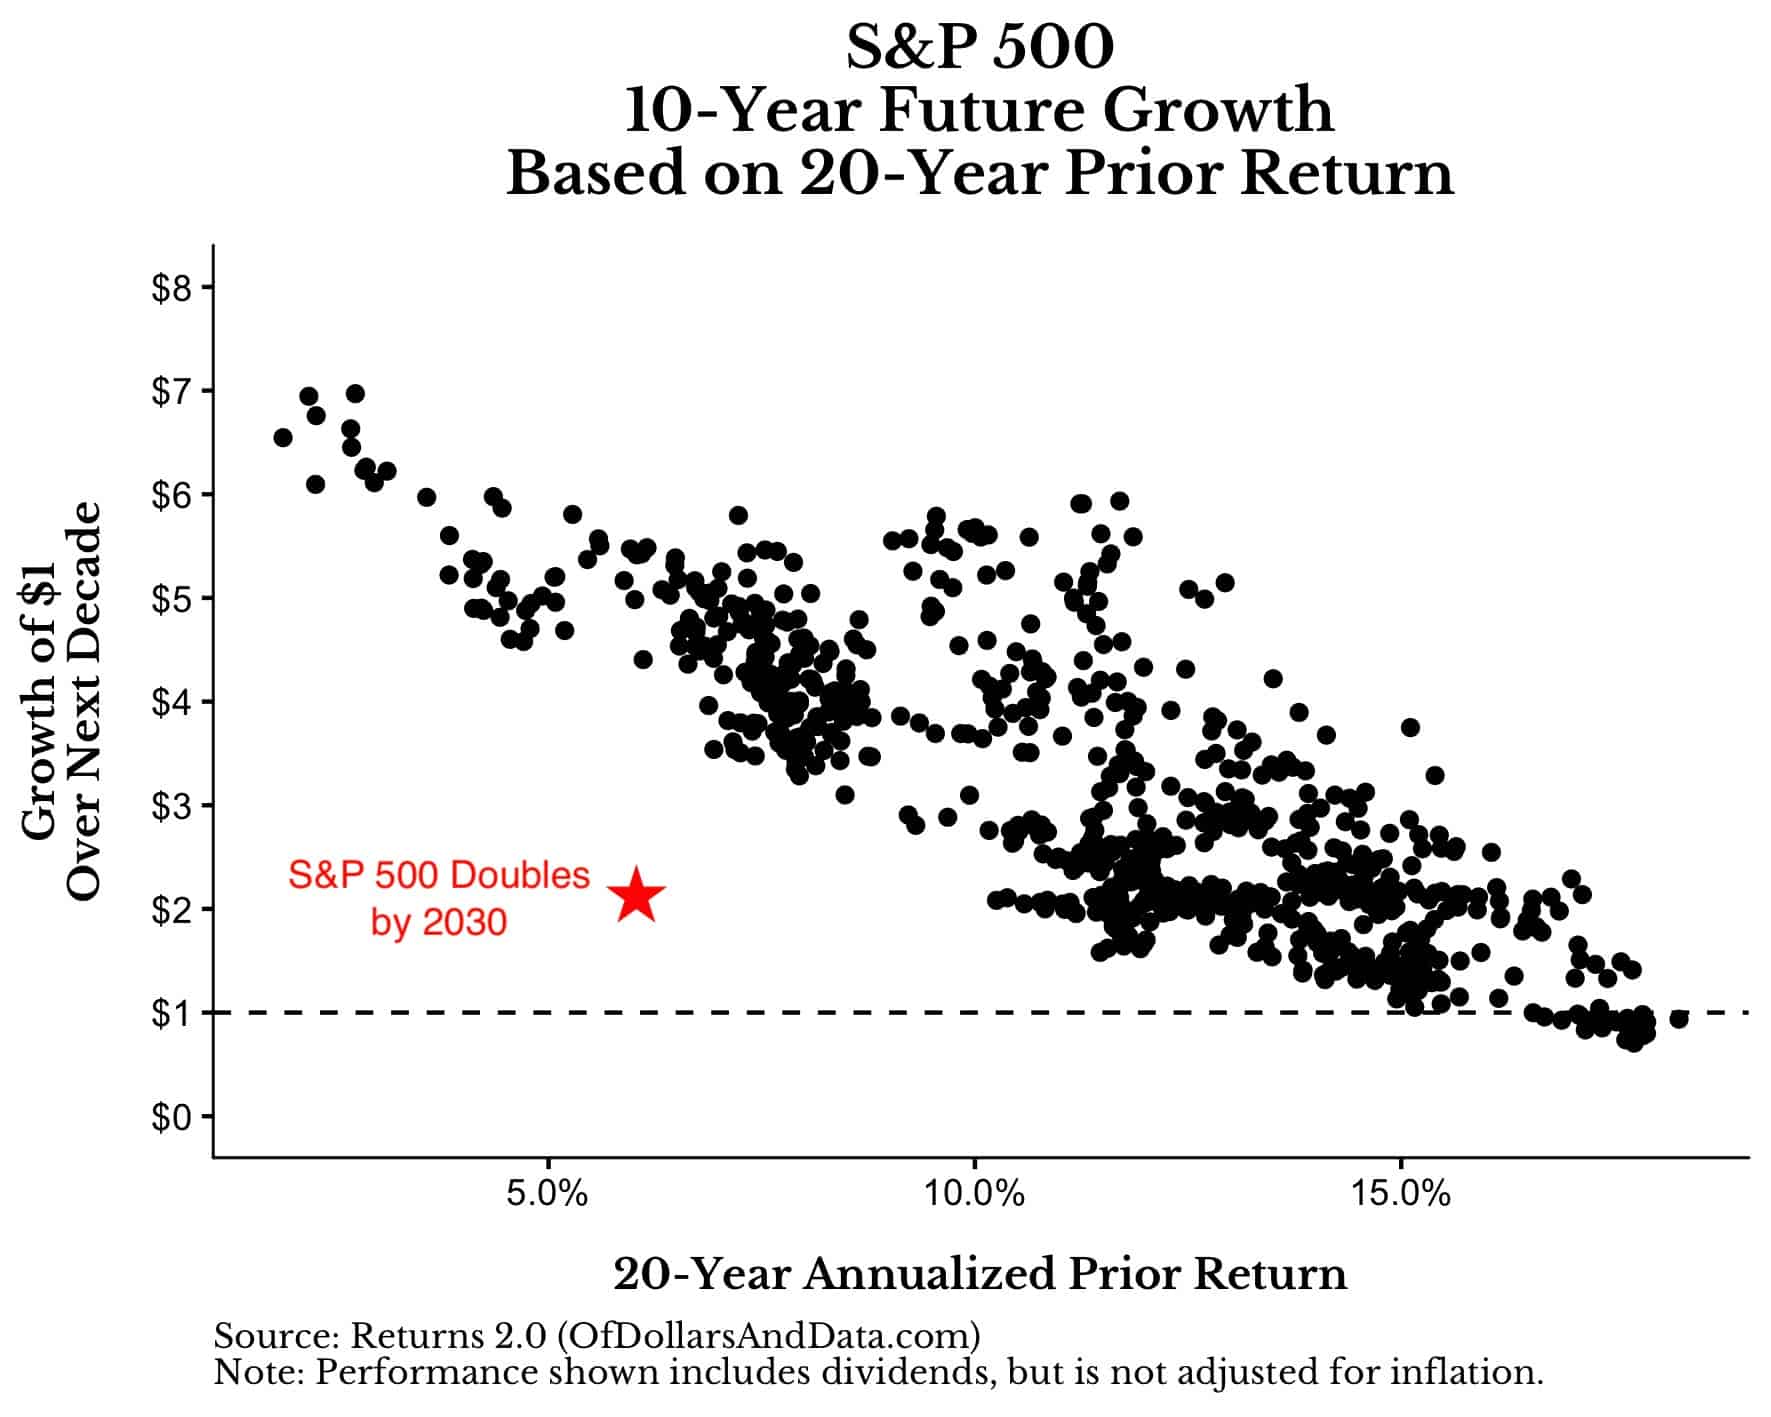 S&P 500 10-year future growth vs 20-year prior growth and what the S&P 500 doubling by 2030 means